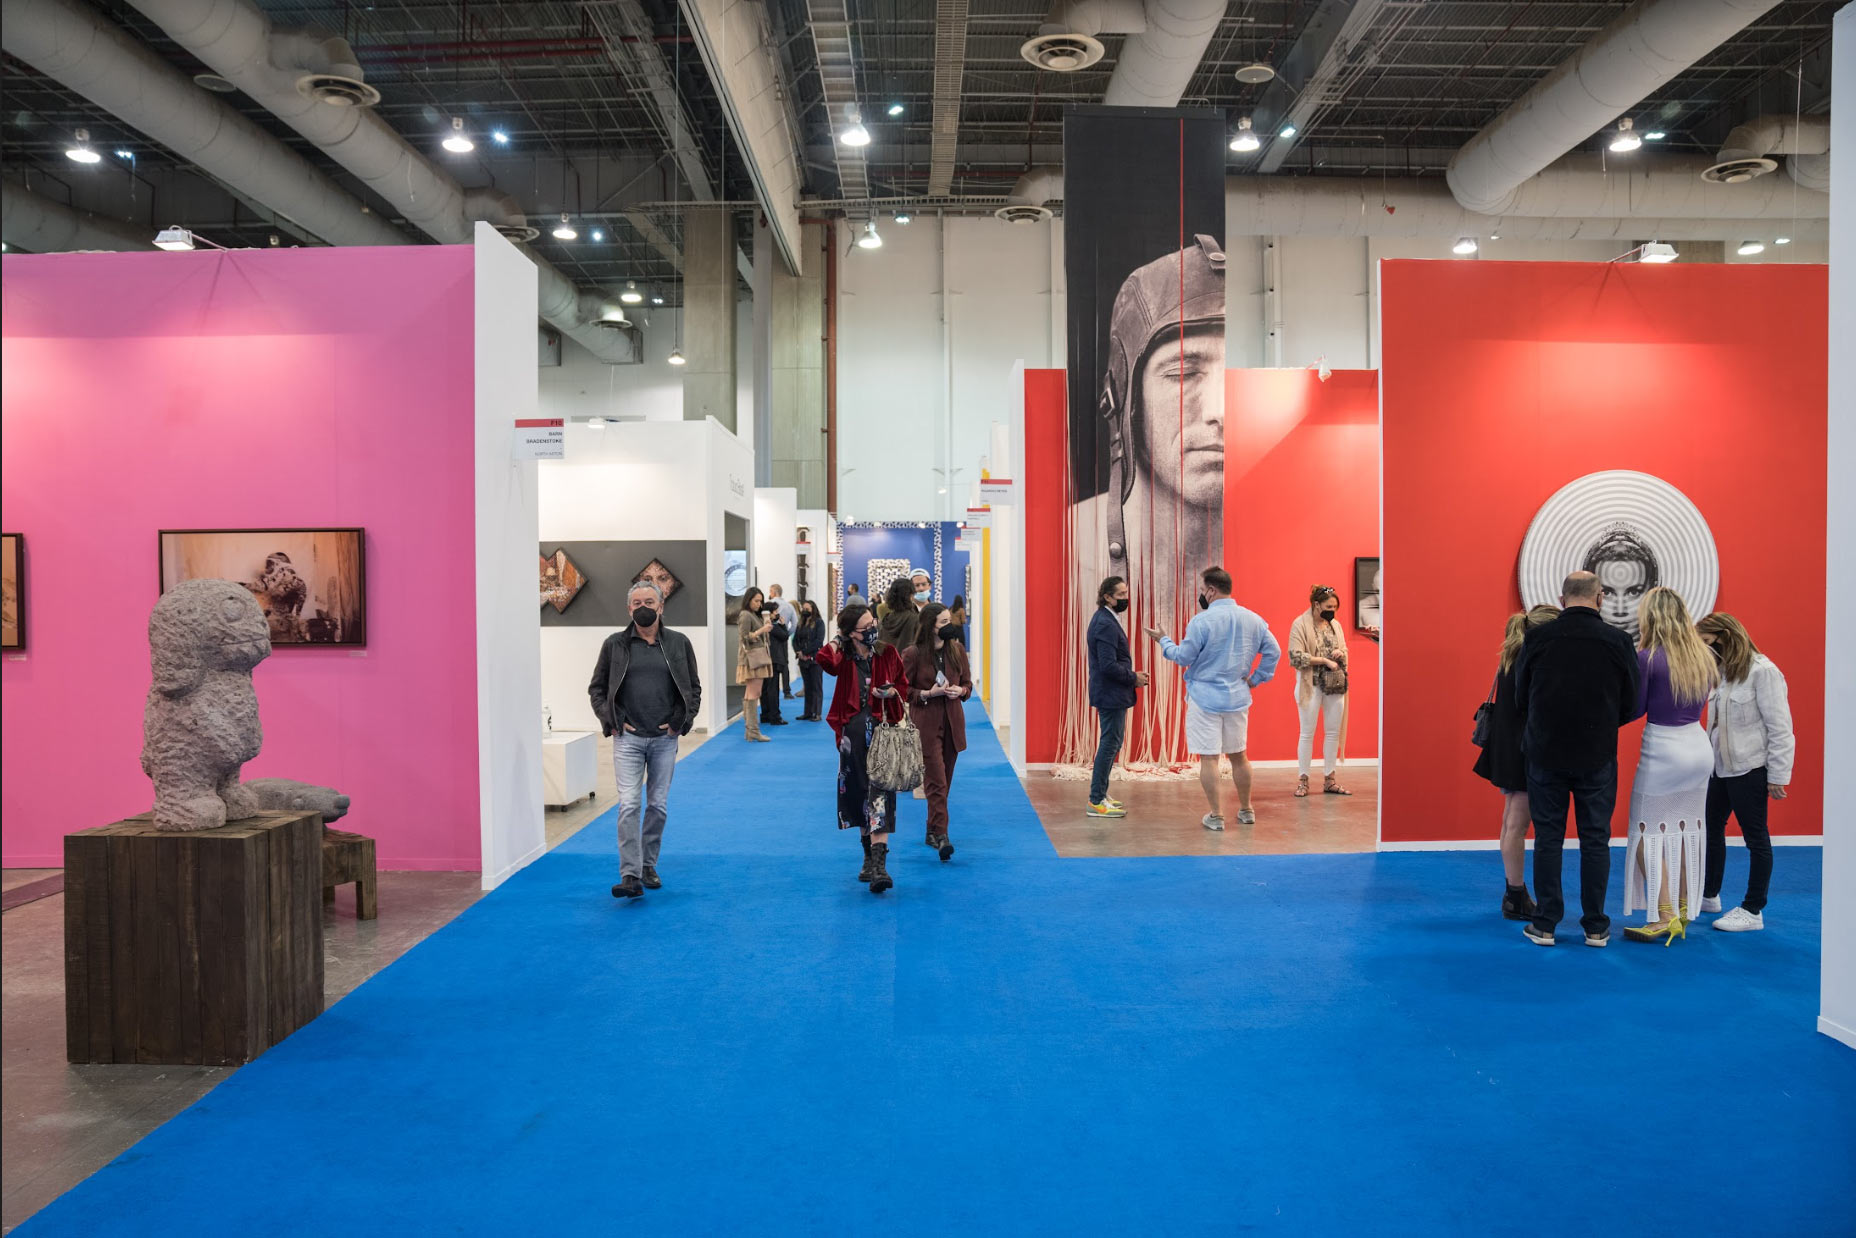 ZsONAMACO, the most important art fair in Latin America takes place every year in early February in Mexico City